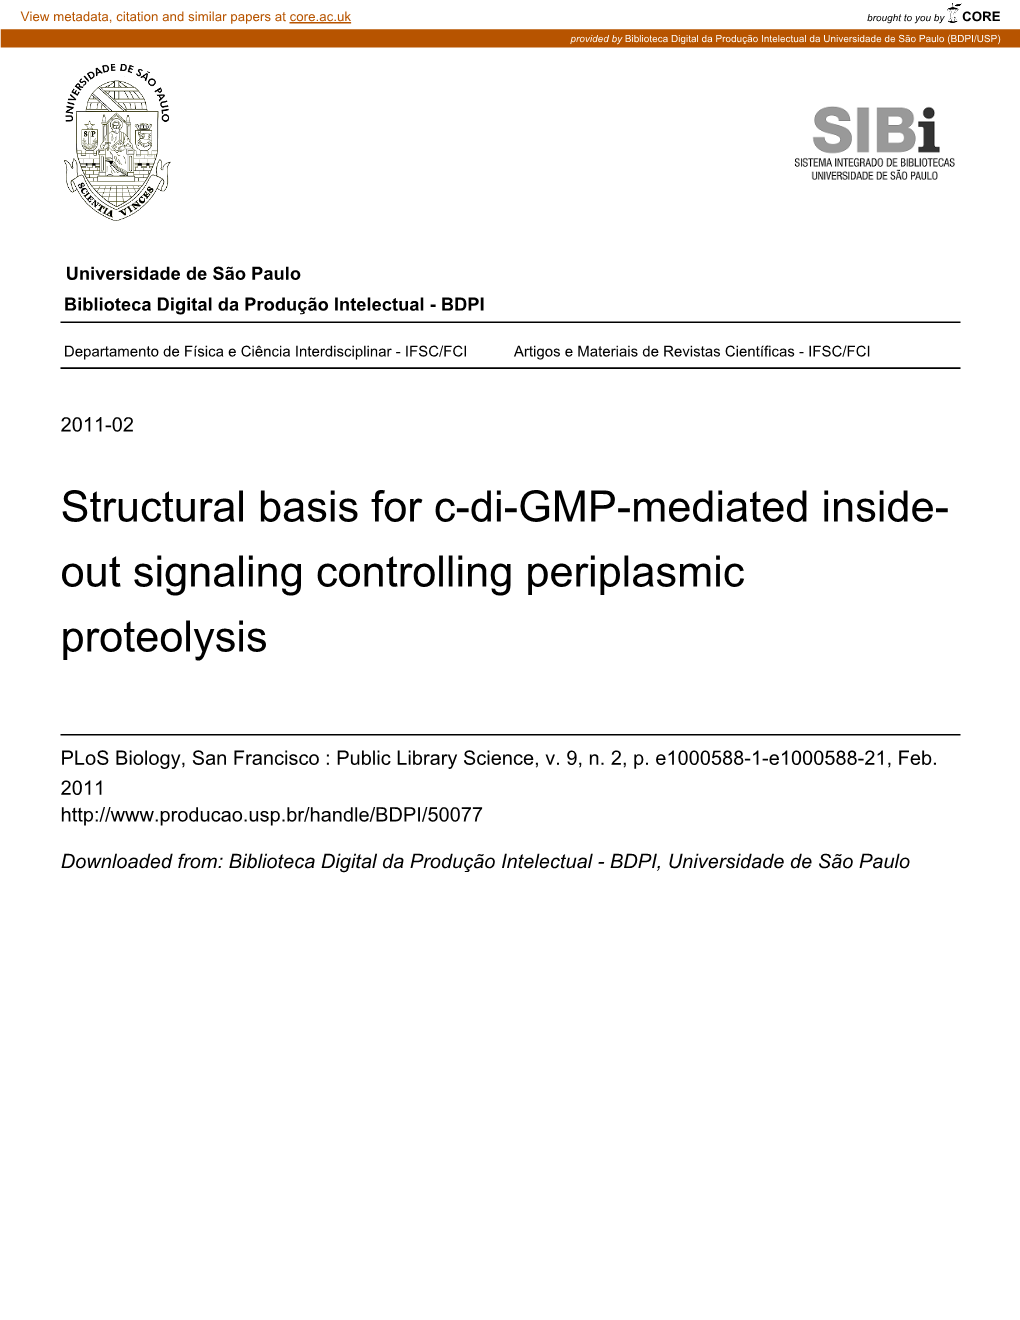 Structural Basis for C-Di-GMP-Mediated Inside- out Signaling Controlling Periplasmic Proteolysis